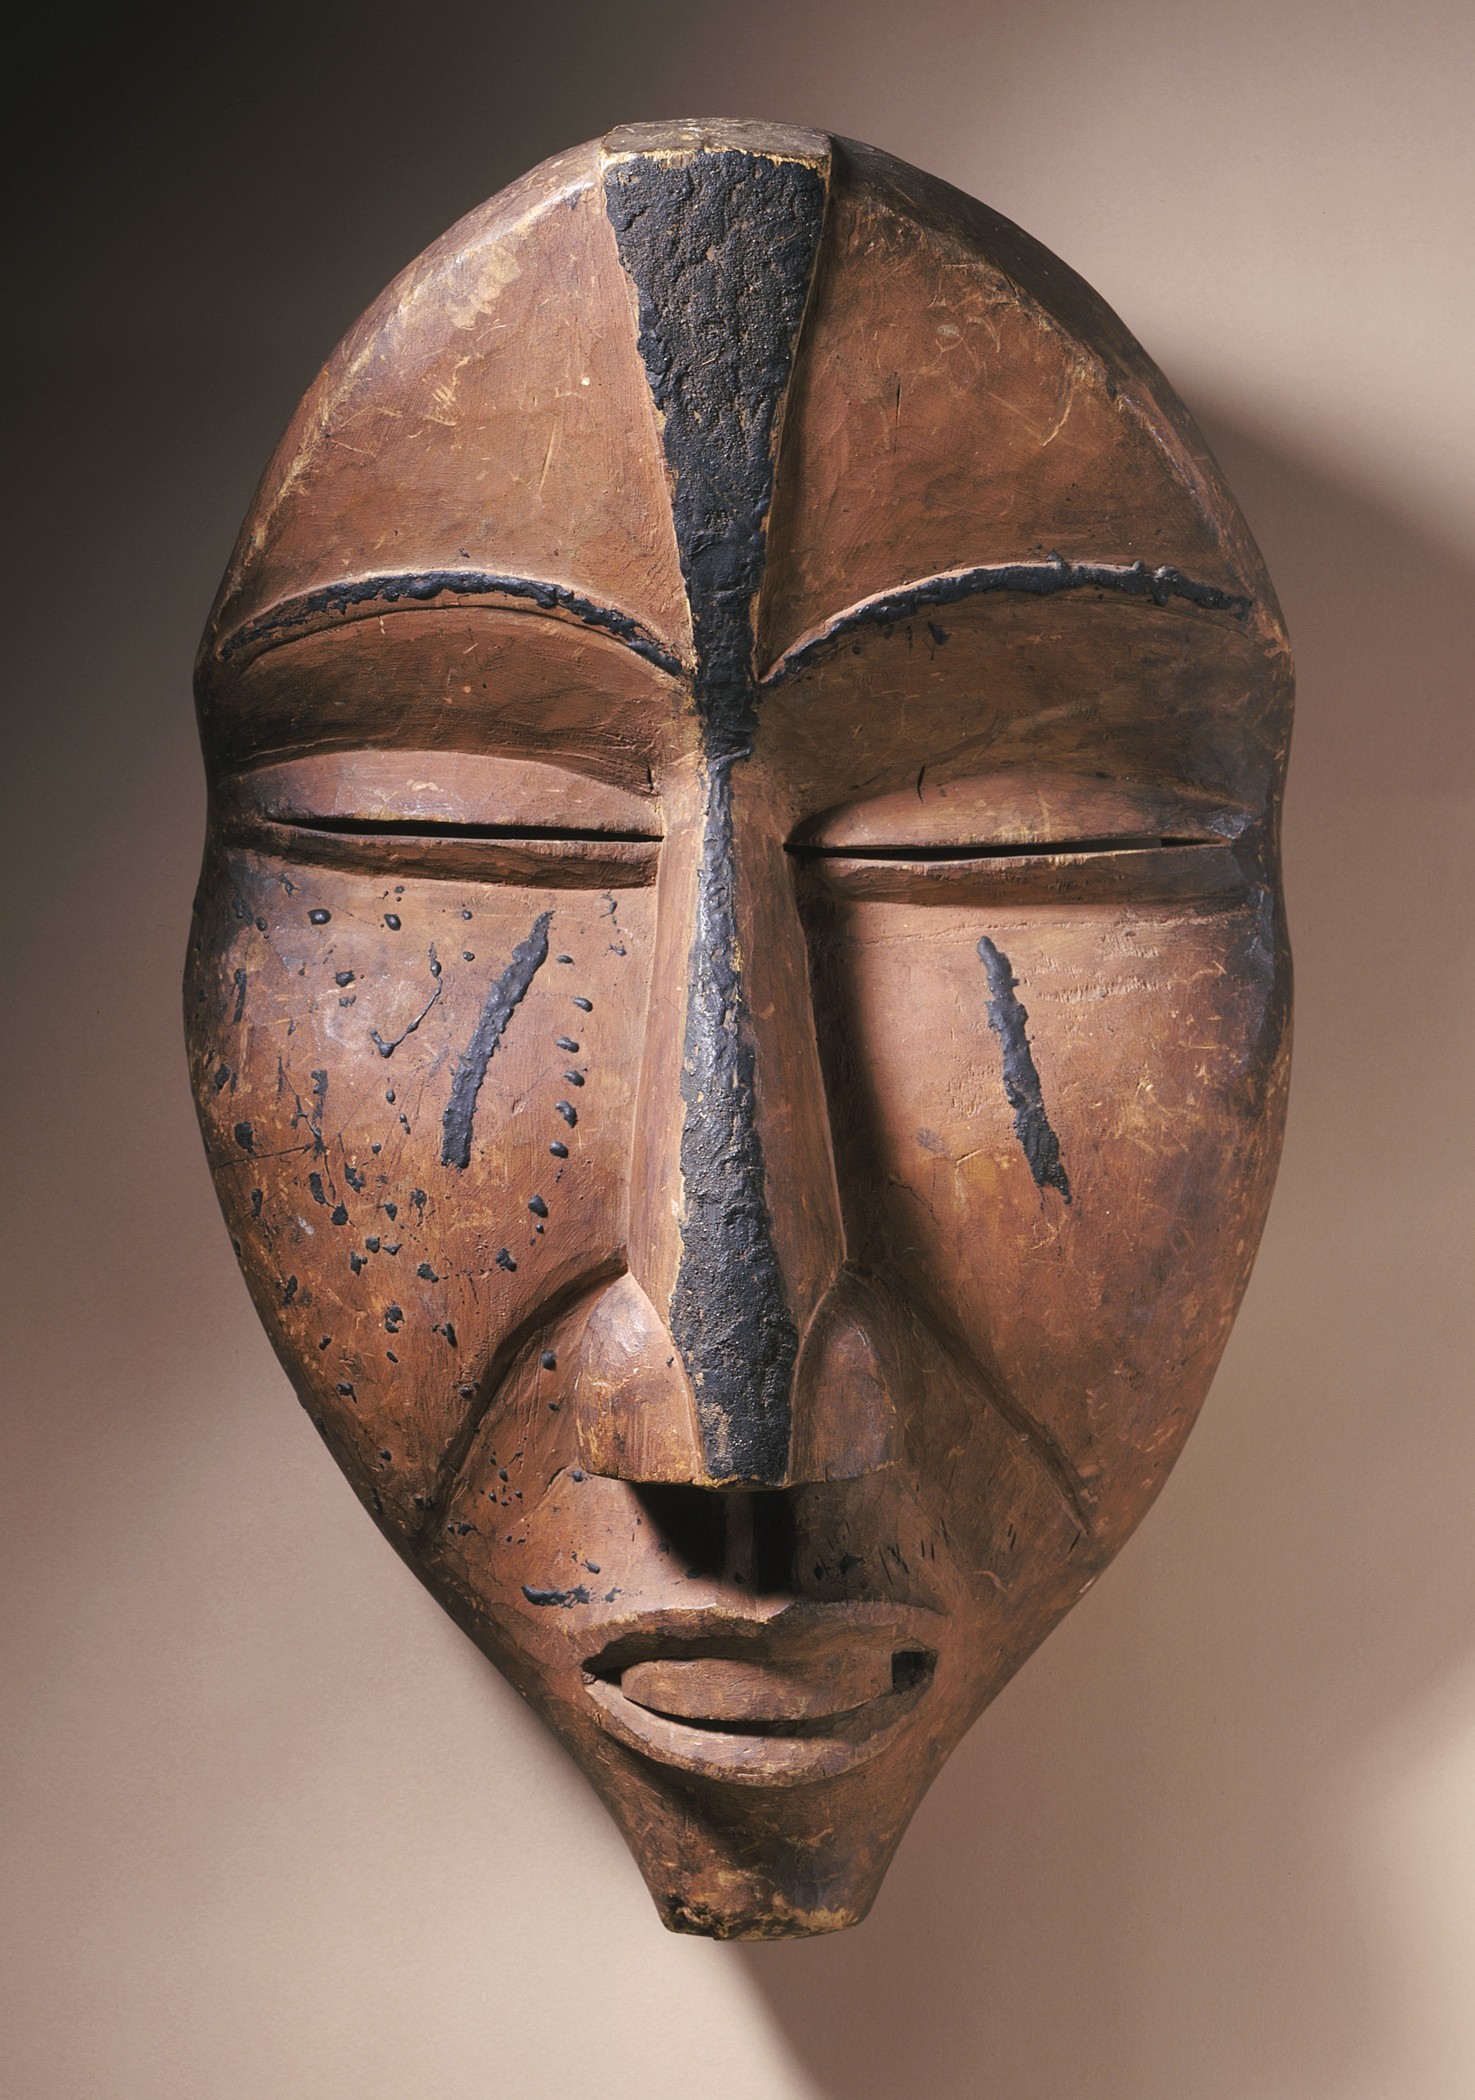 Image: Mask, Woyo peoples, Democratic Republic of the Congo, early 20th century